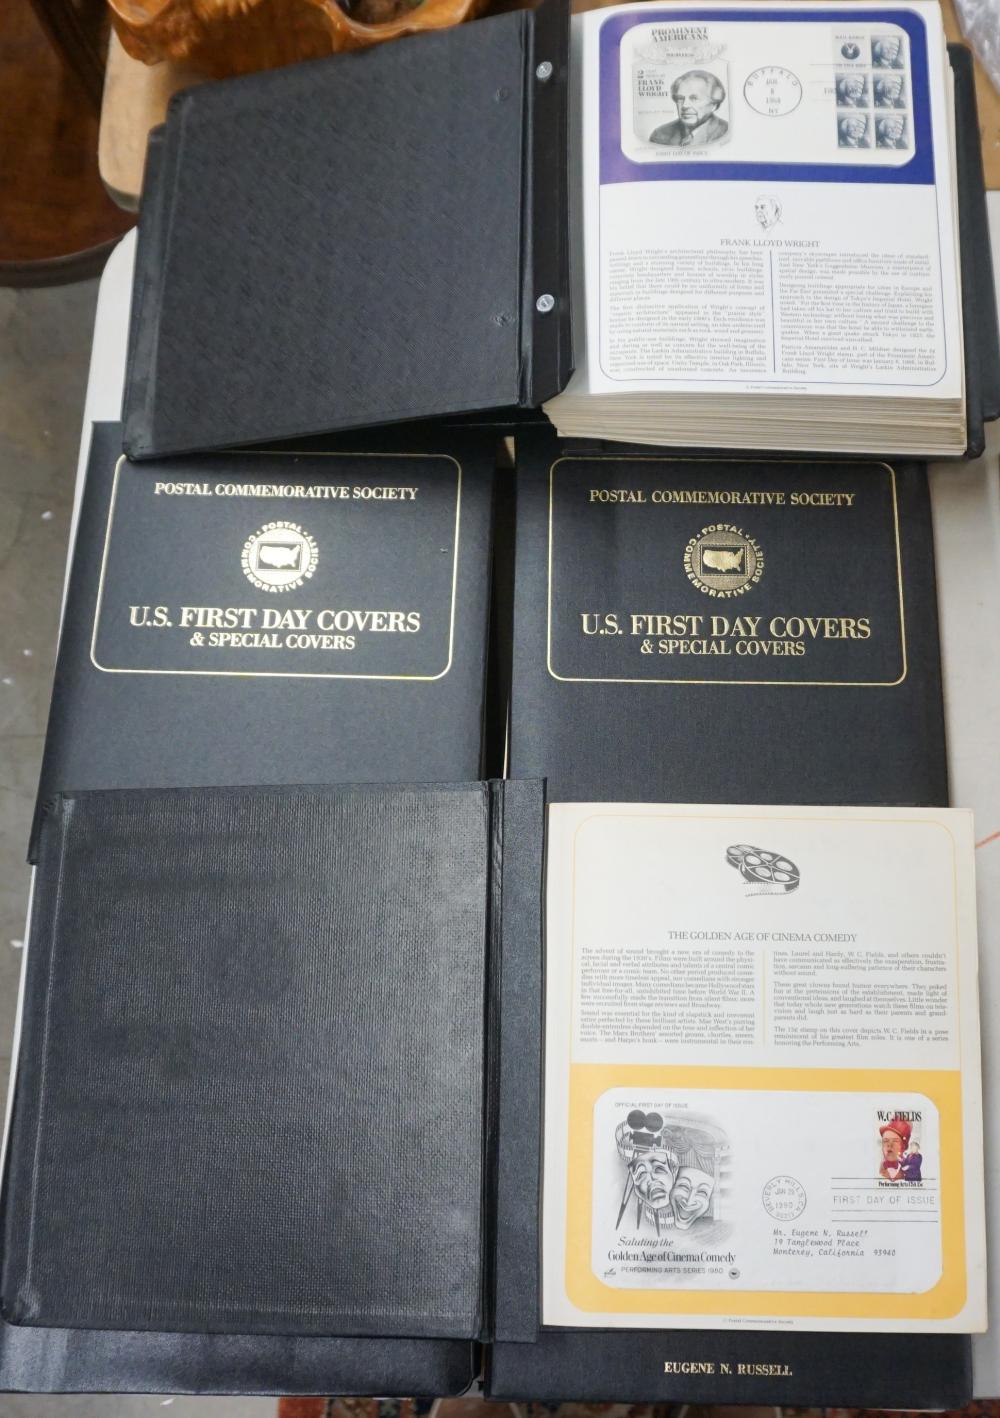 EIGHT VOLUMES OF U.S. FIRST DAY